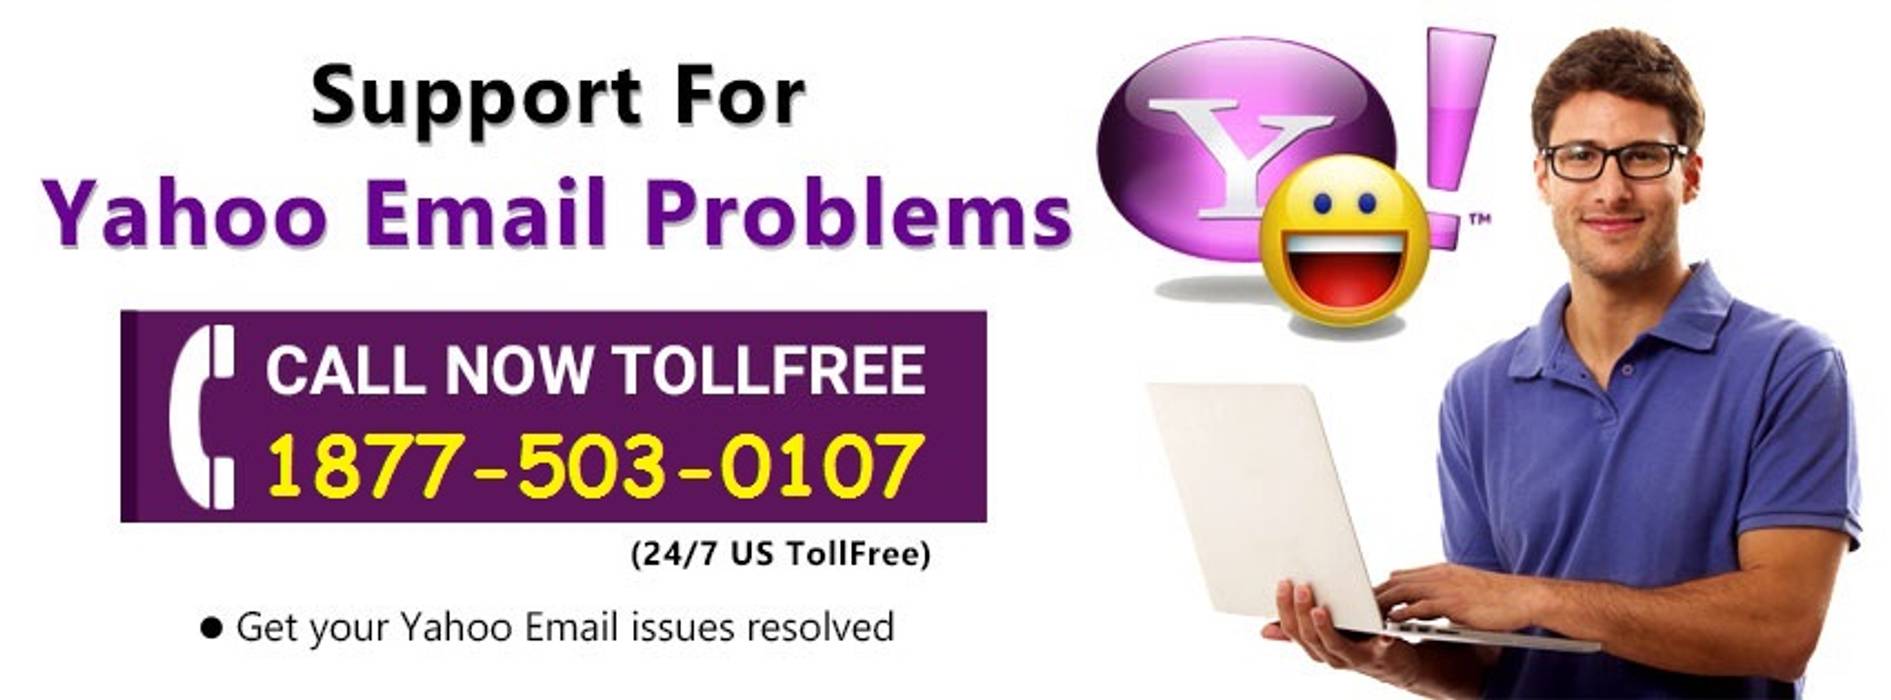 Yahoo Mail Customer Service Number 1877-503-0107 Yahoo Mail Support Number 1877-503-0107 Floors انجینئر لکڑی Transparent